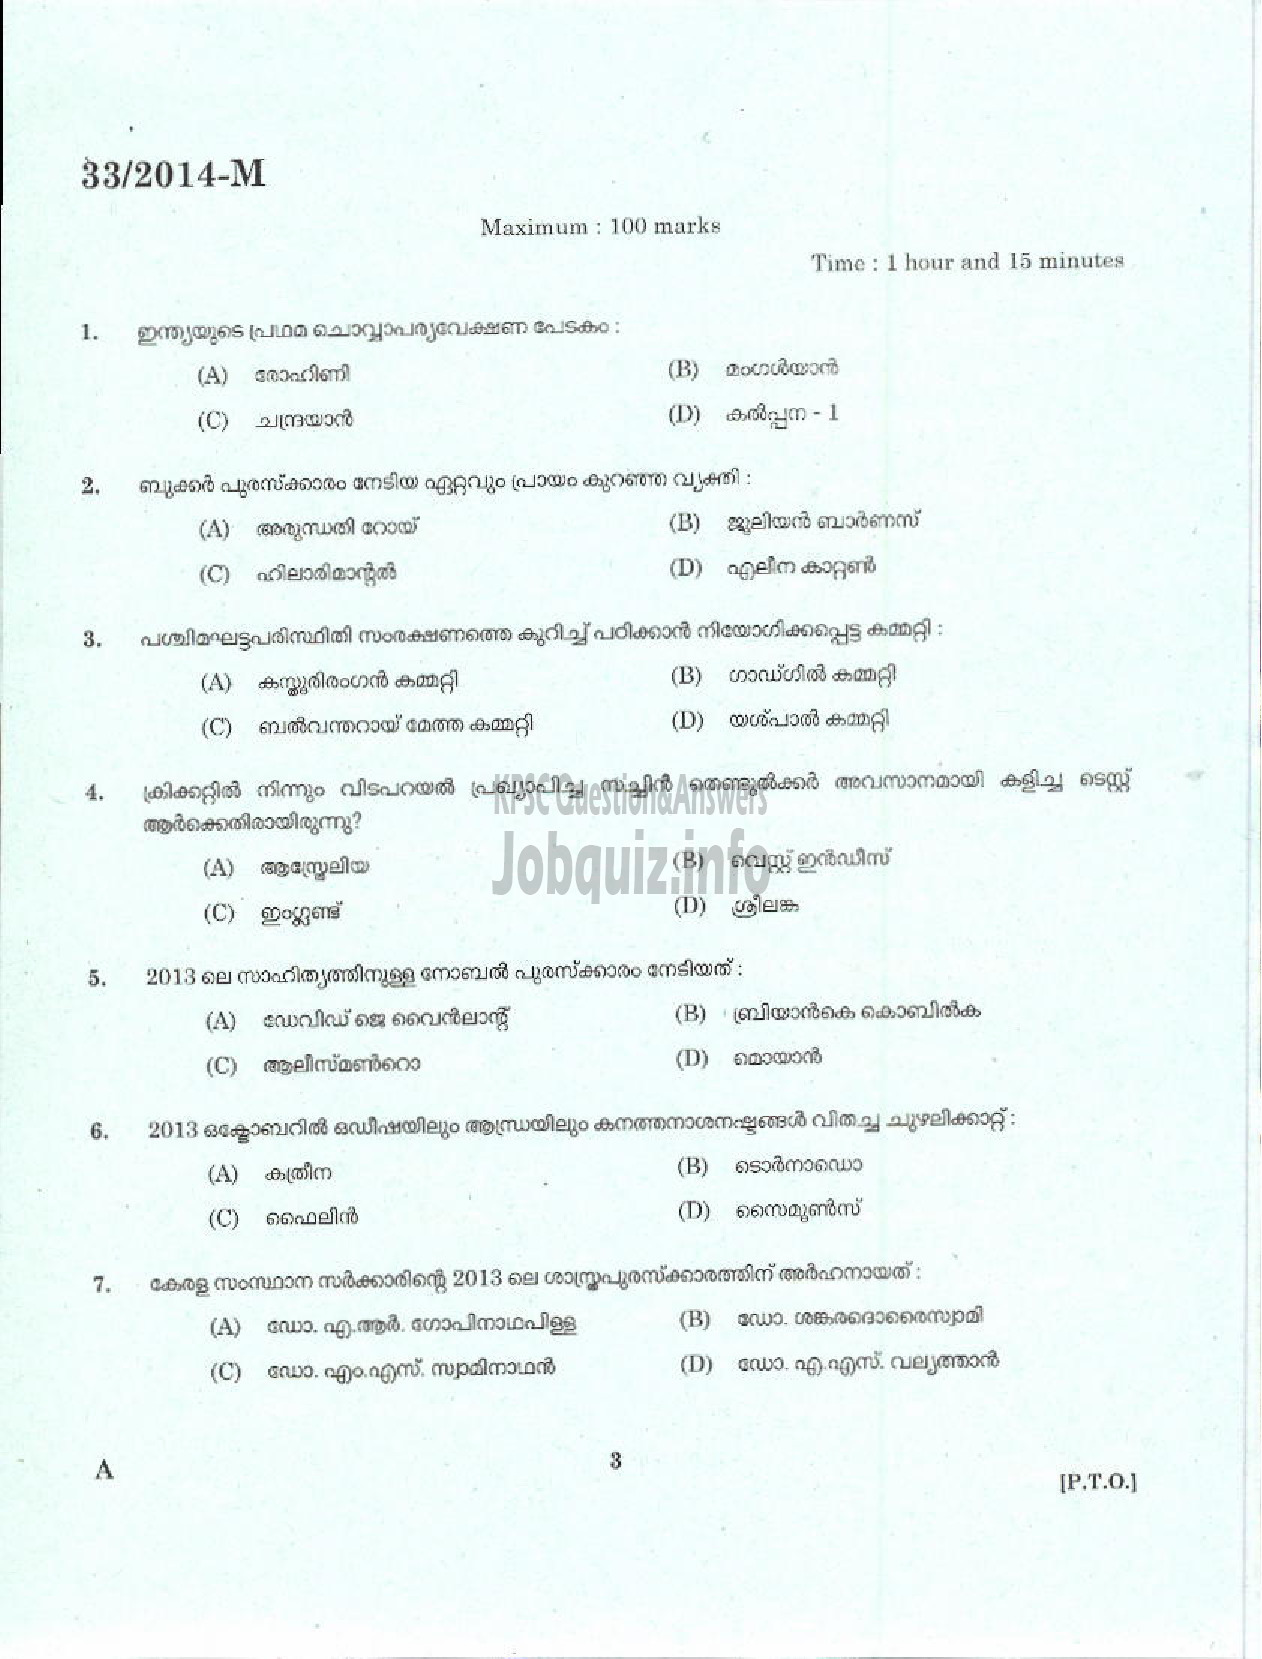 Kerala PSC Question Paper - FIELD WORKER SR FOR ST HEALTH SERVICES/LGS PH VARIOUS ( Malayalam ) -1